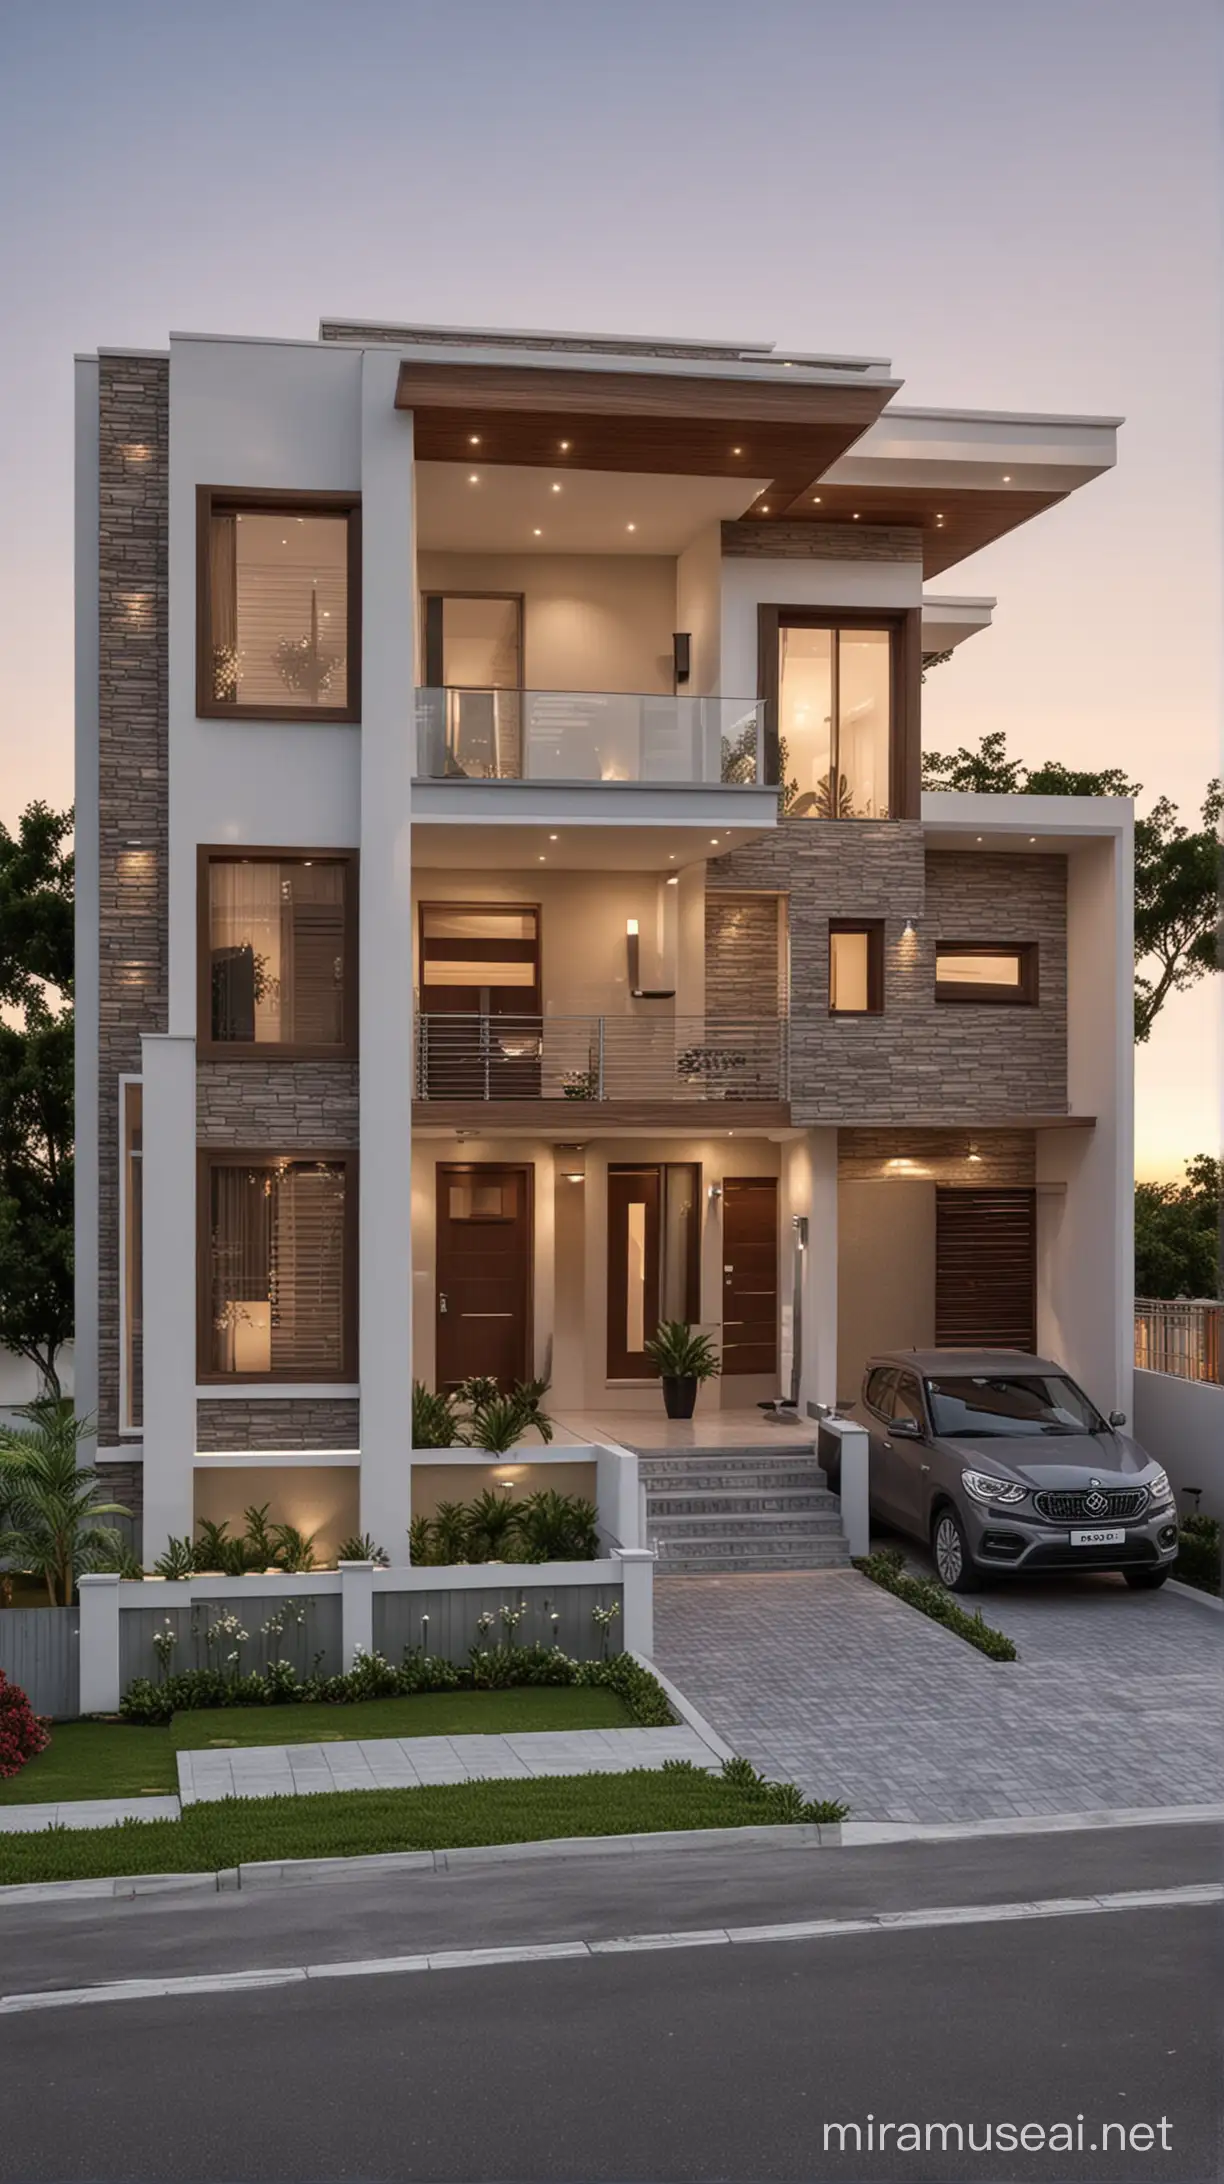 BudgetFriendly TwoStory Small Front House Design with Flat Roof and Wooden Aesthetic Lighting